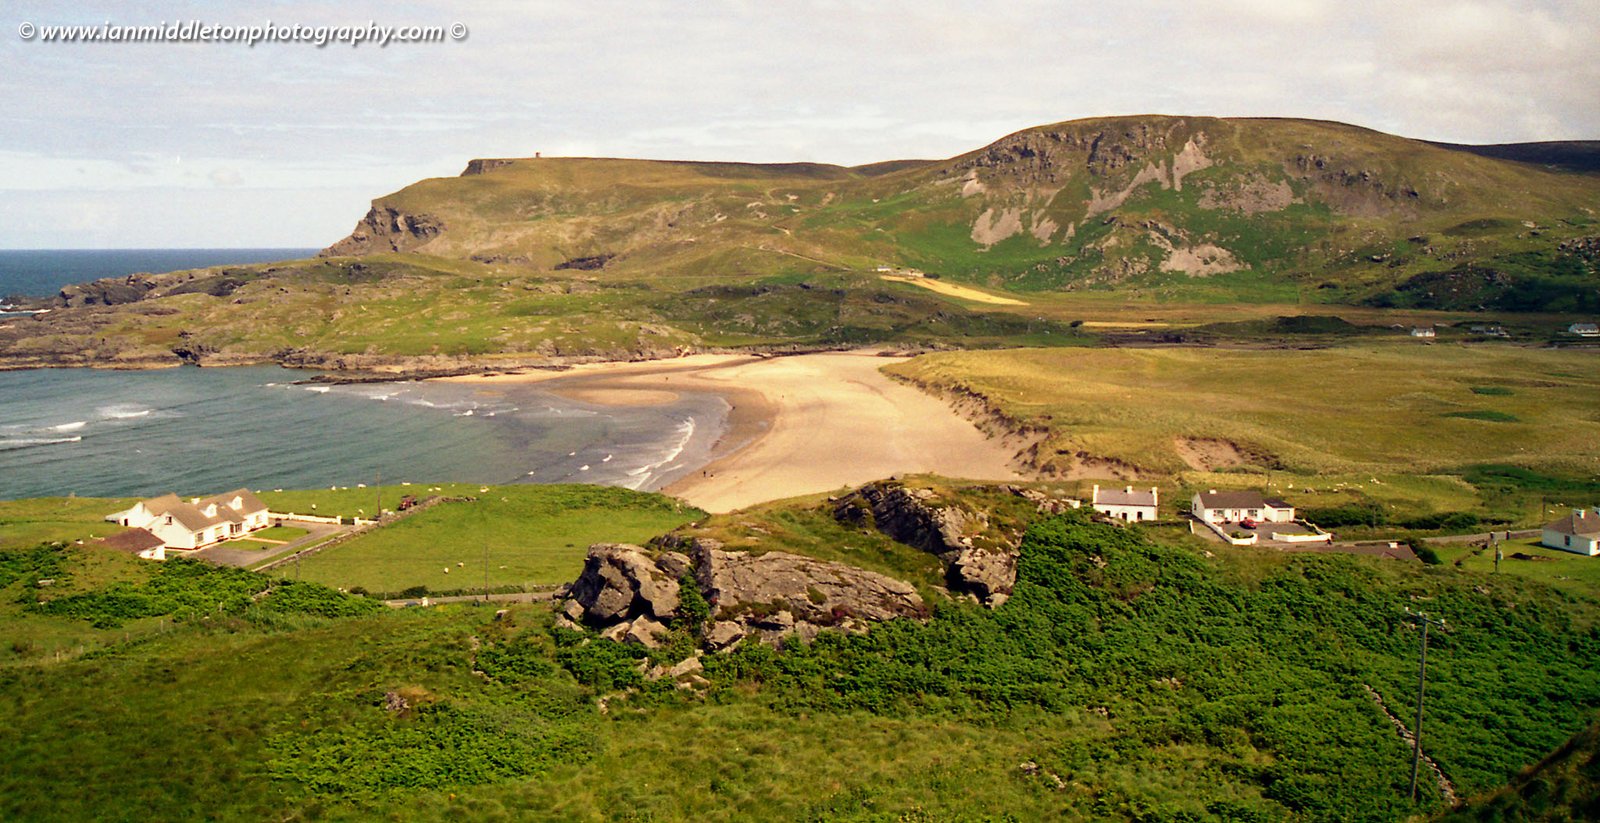 View of beach at Glencolmcille, Southern Donegal.